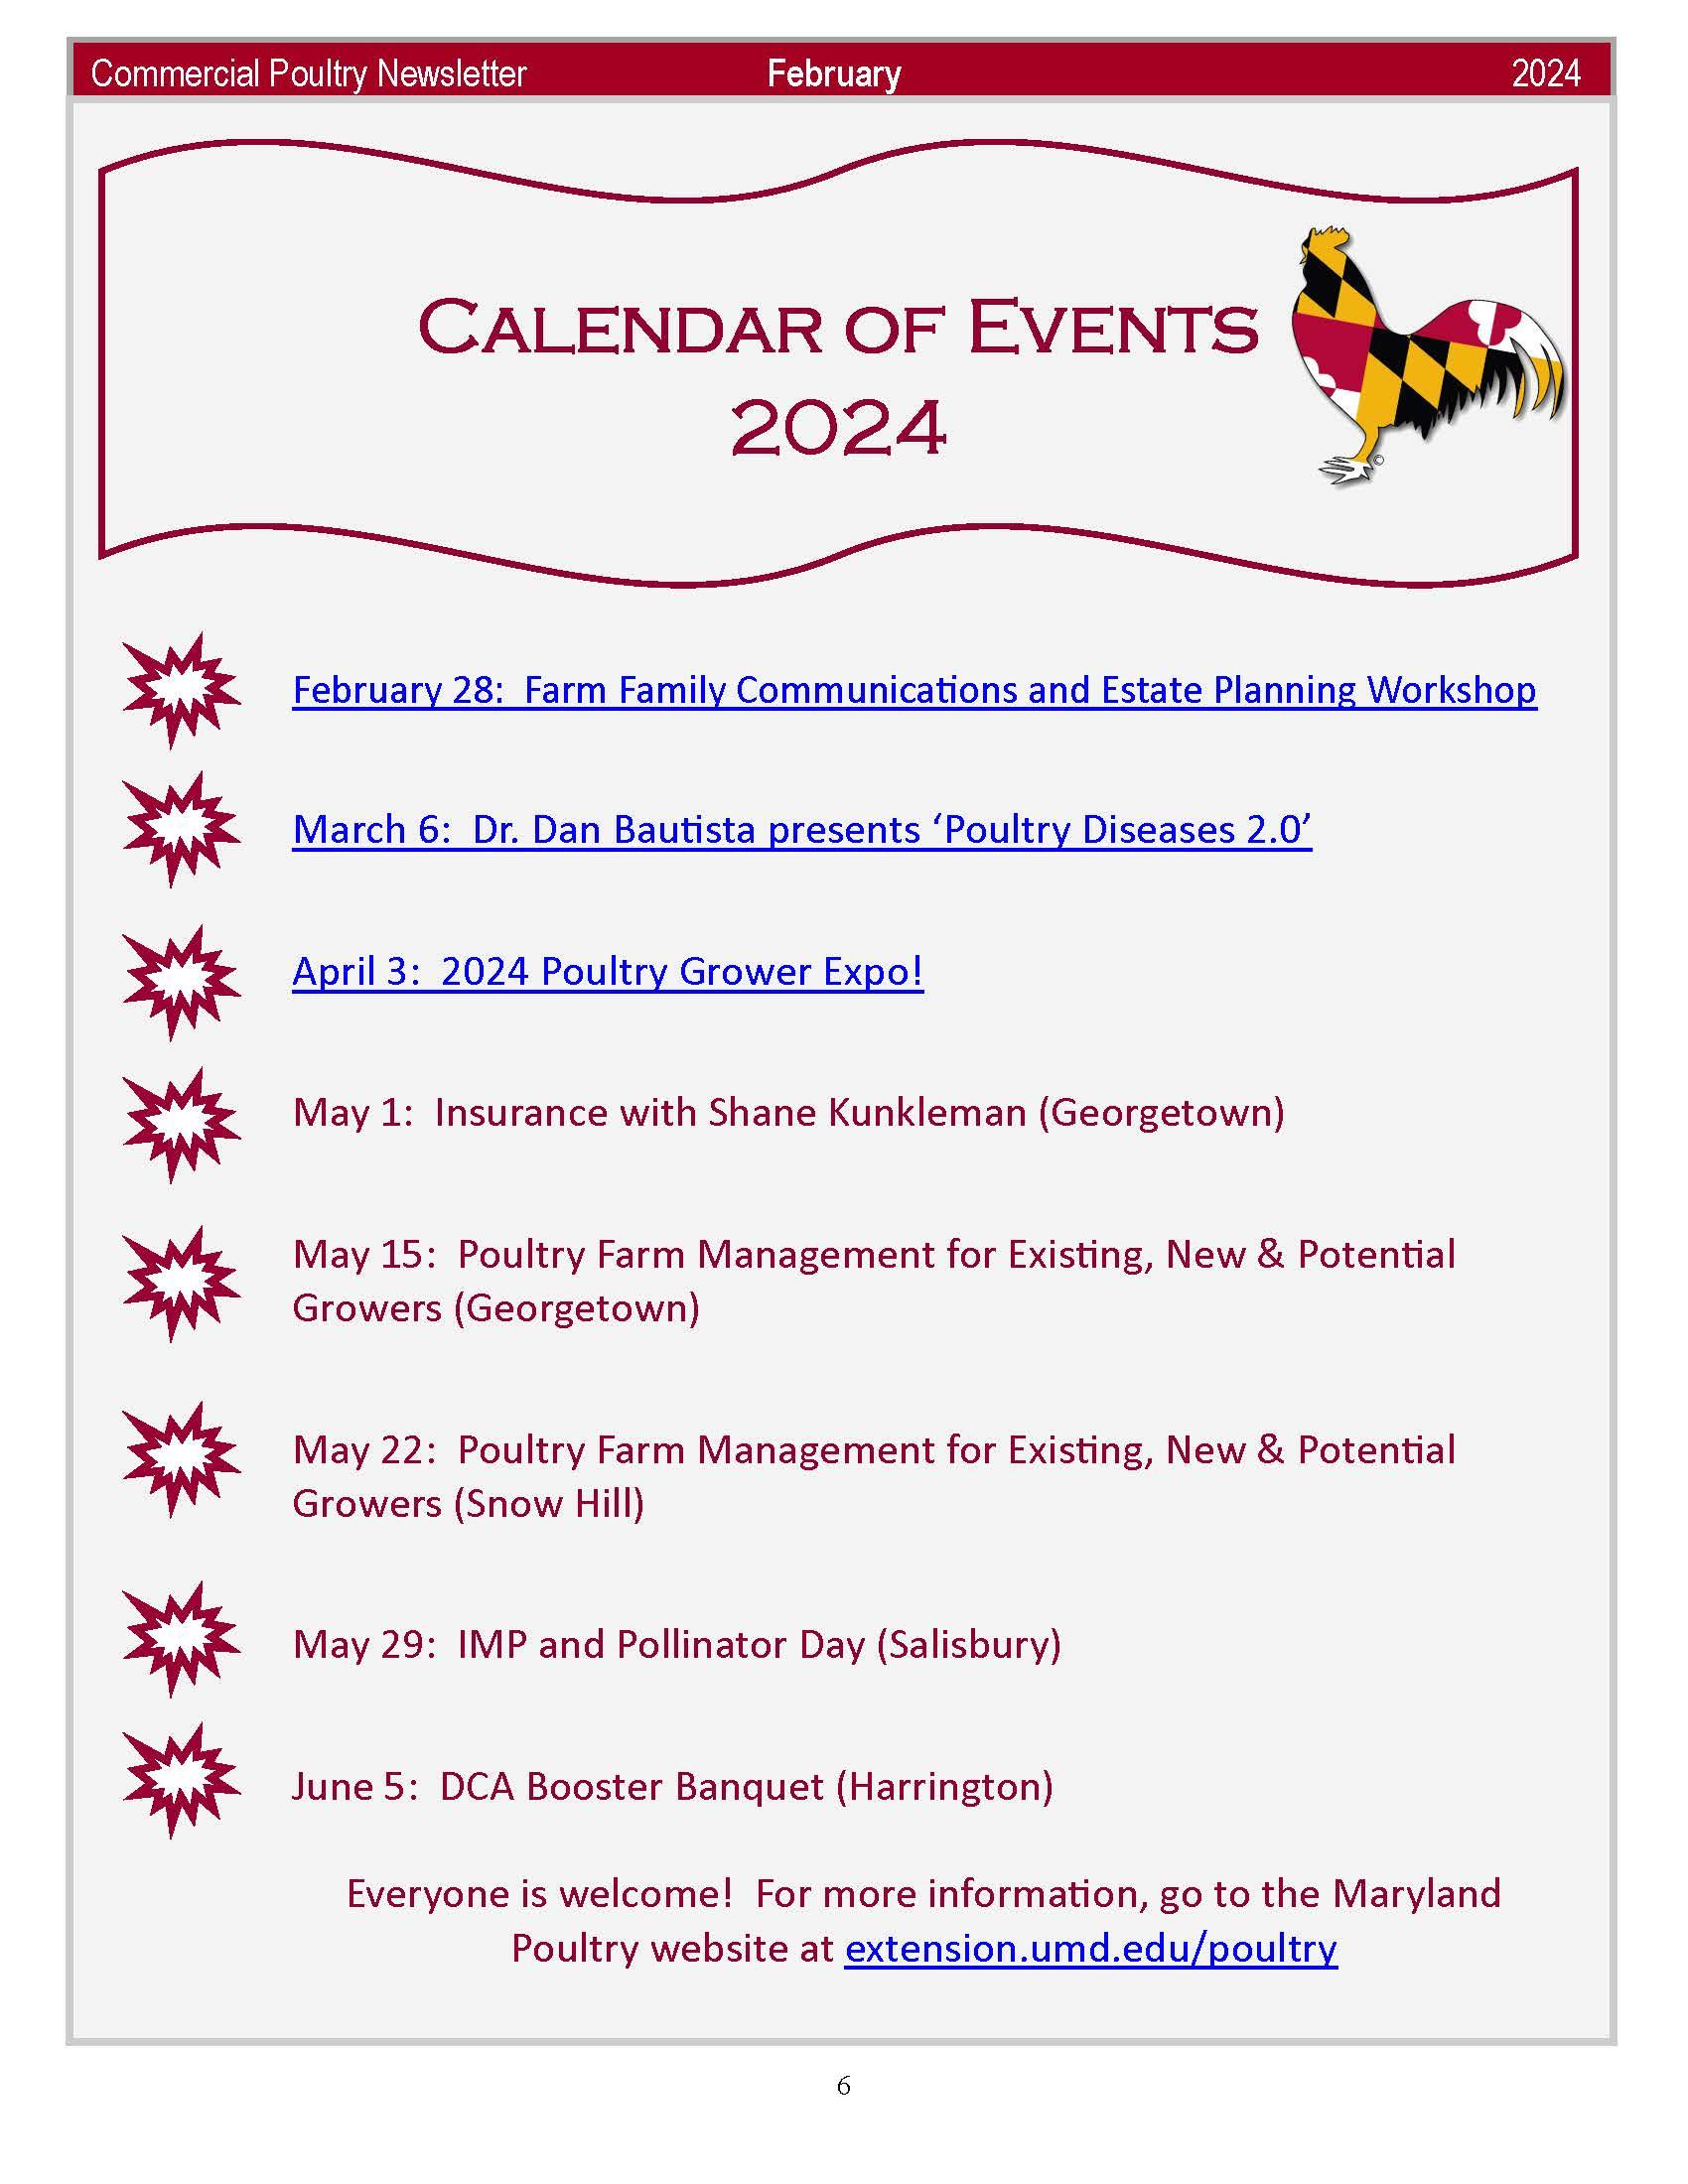 Calendar of Events page for 2024